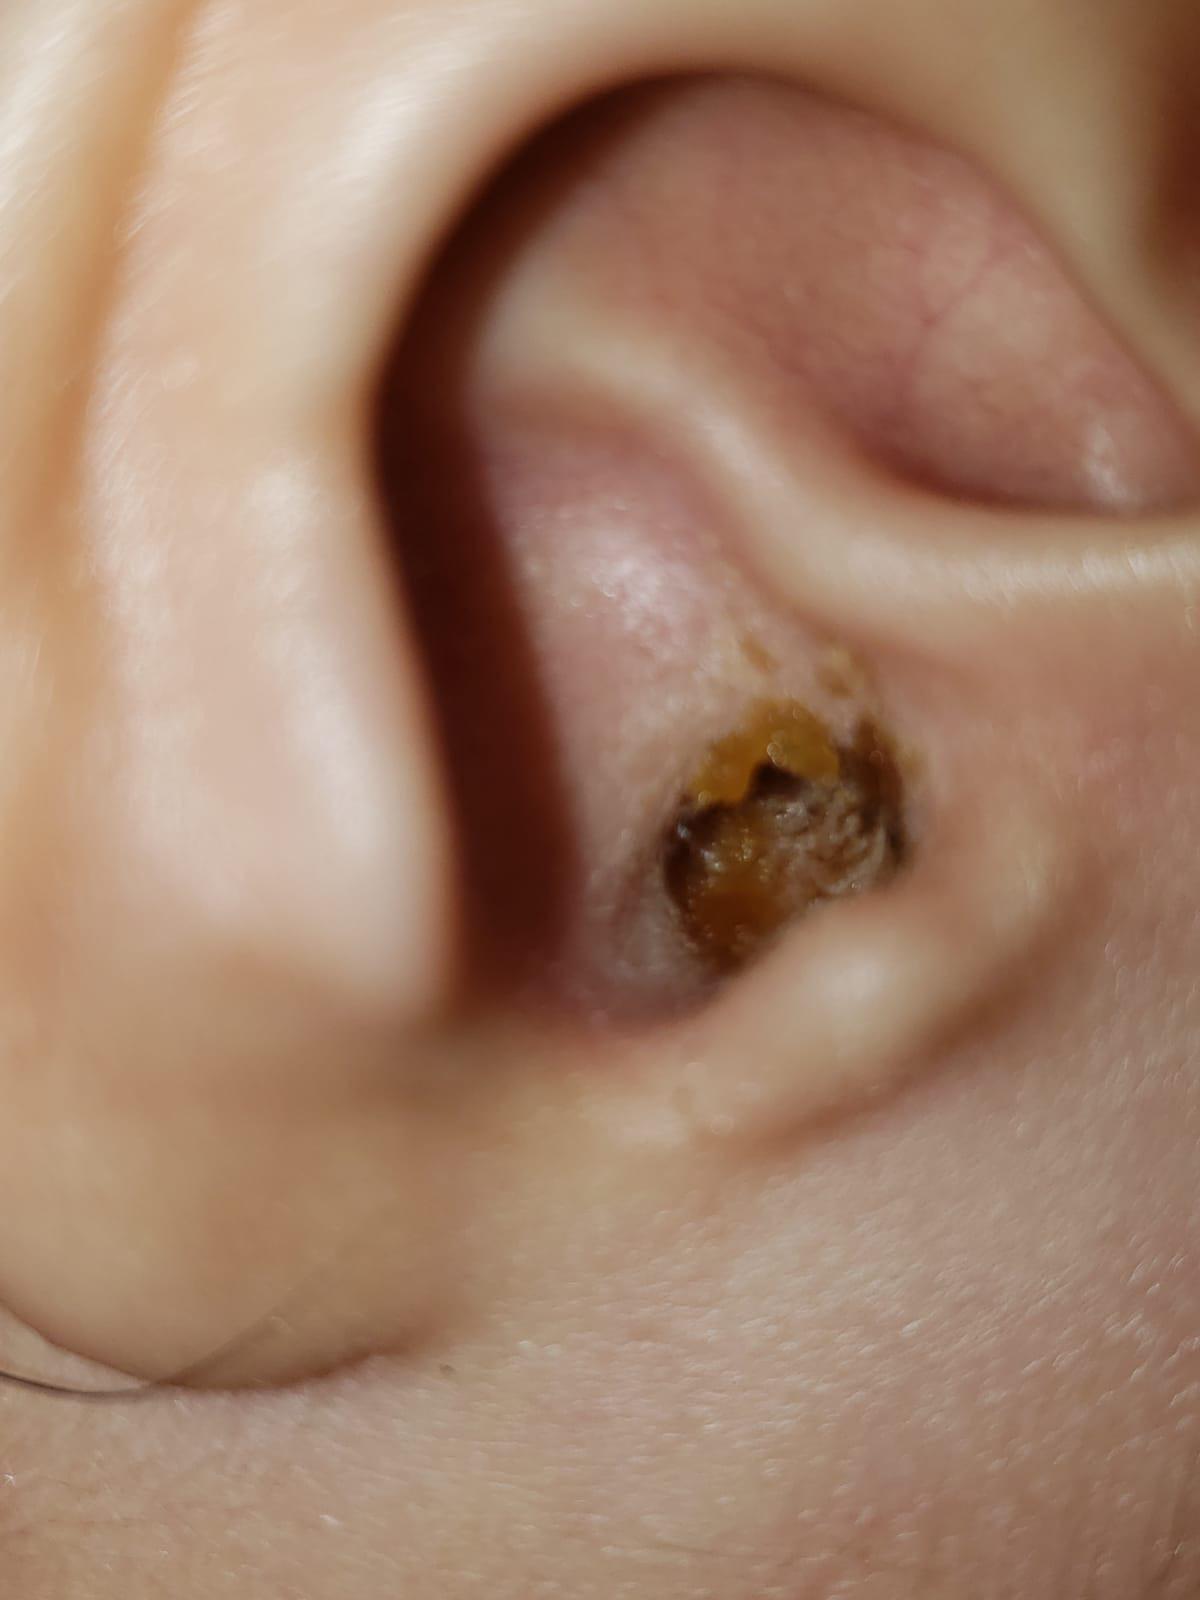 Two year old daughterâs ear, one week after ear infection ...